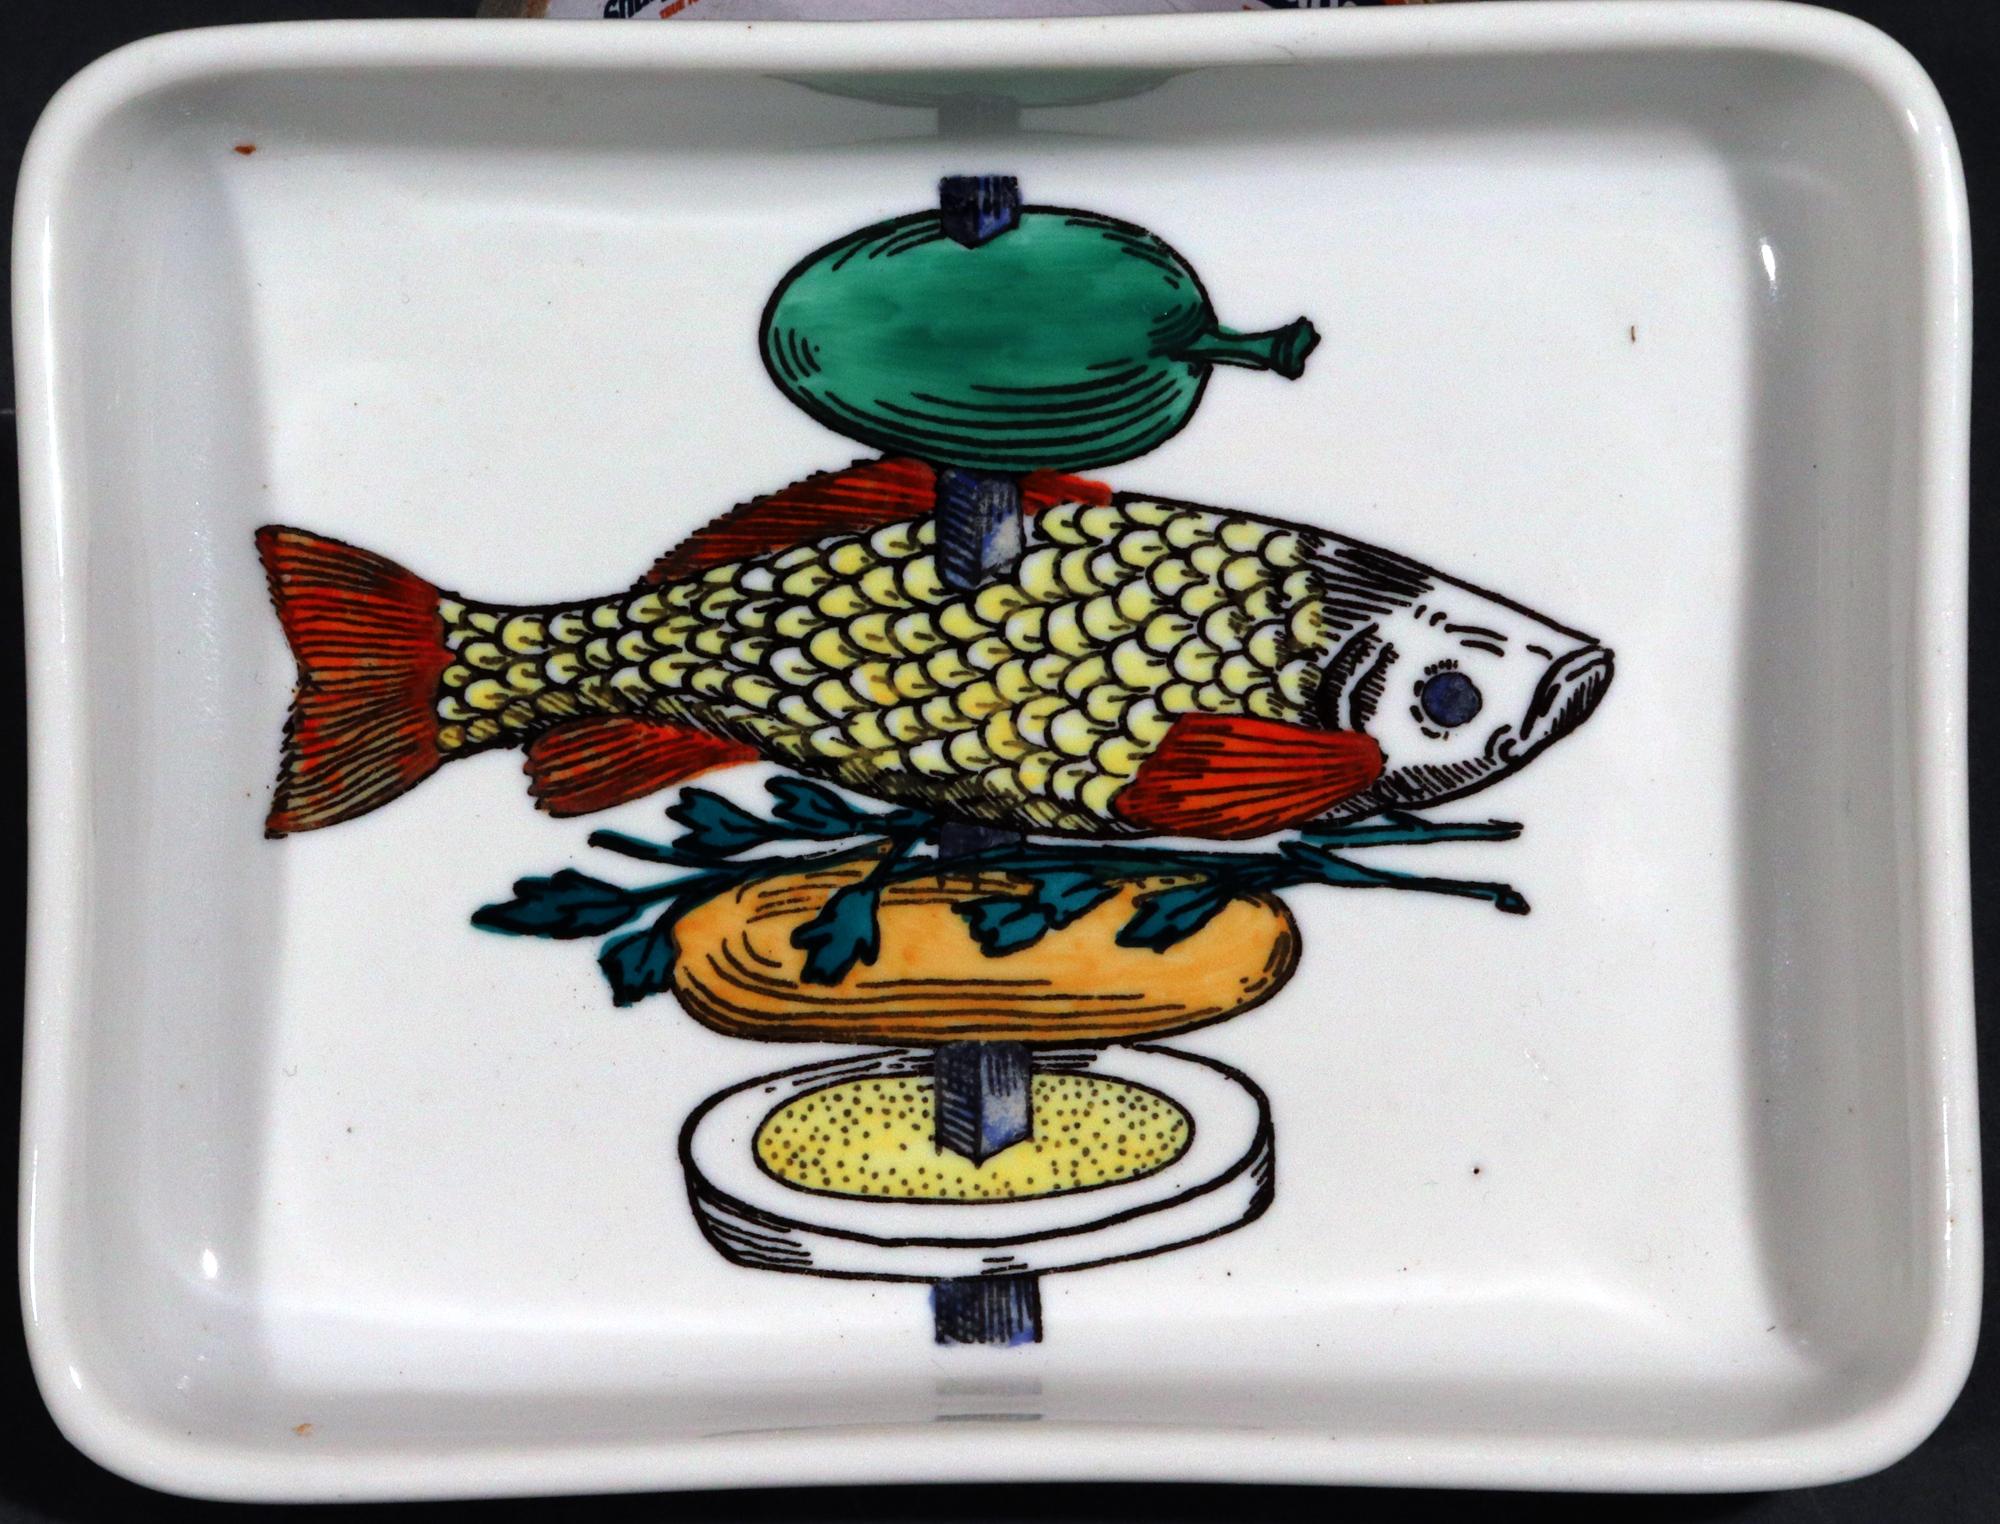 Aluminum Mid-century Modern Piero Fornasetti Ceramic Appetizer Fish Kebab Dishes and Tray For Sale